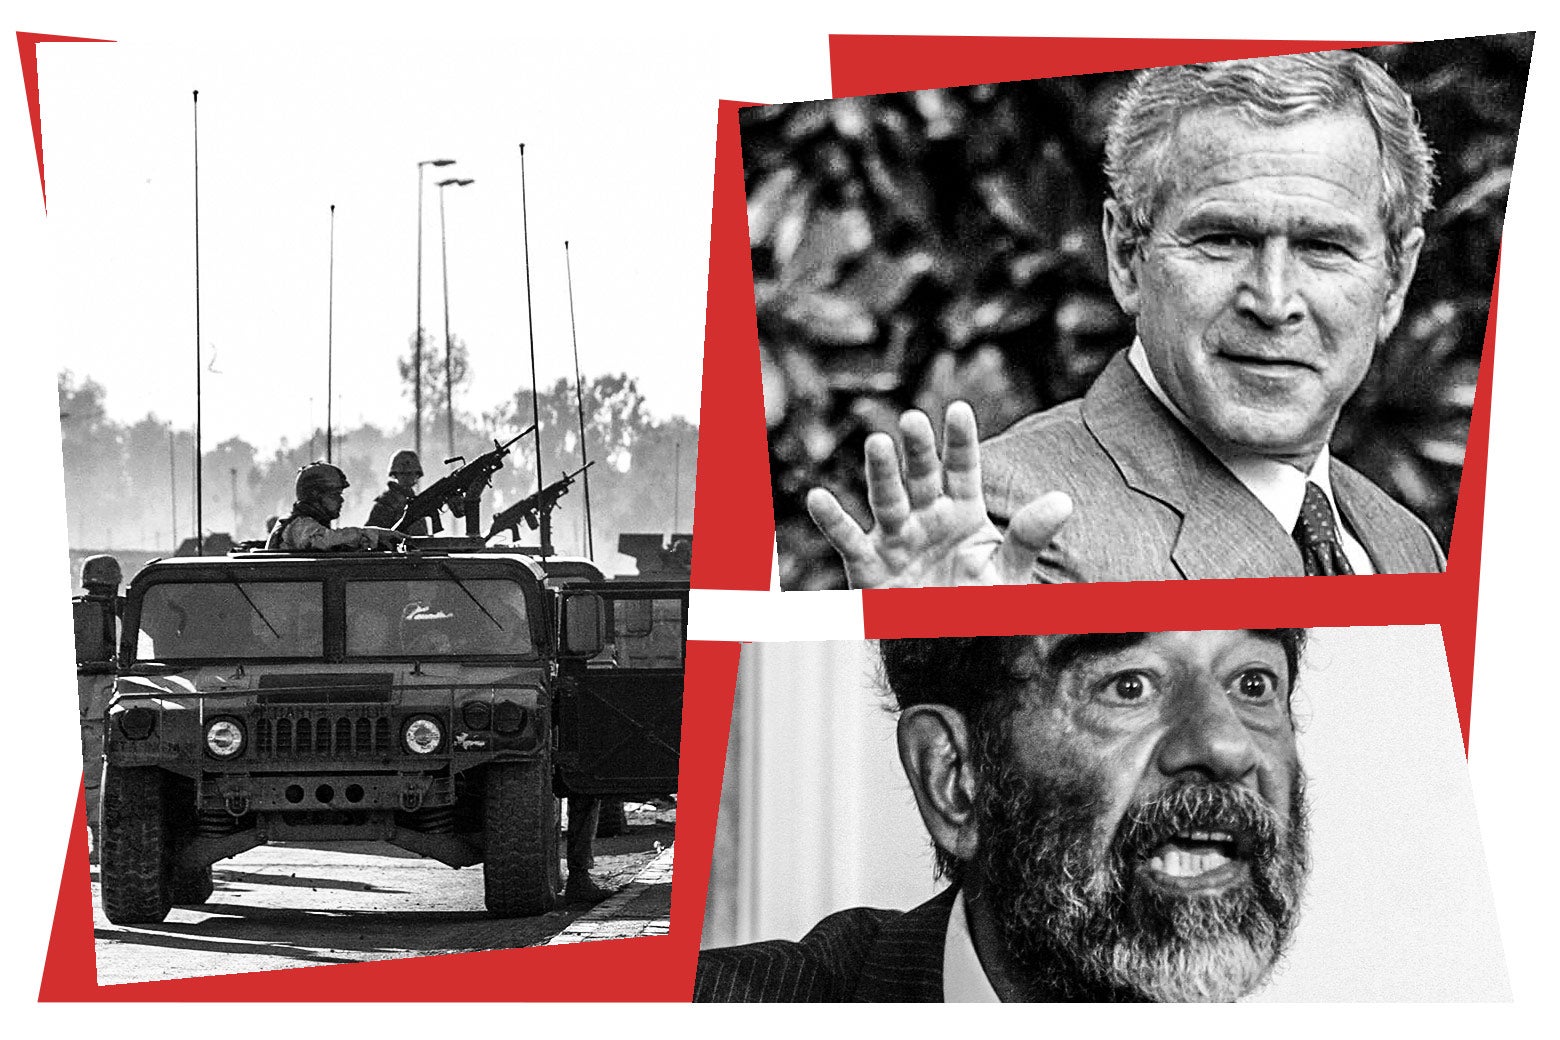 Soldiers in cars, George W. Bush, and Saddam Hussein